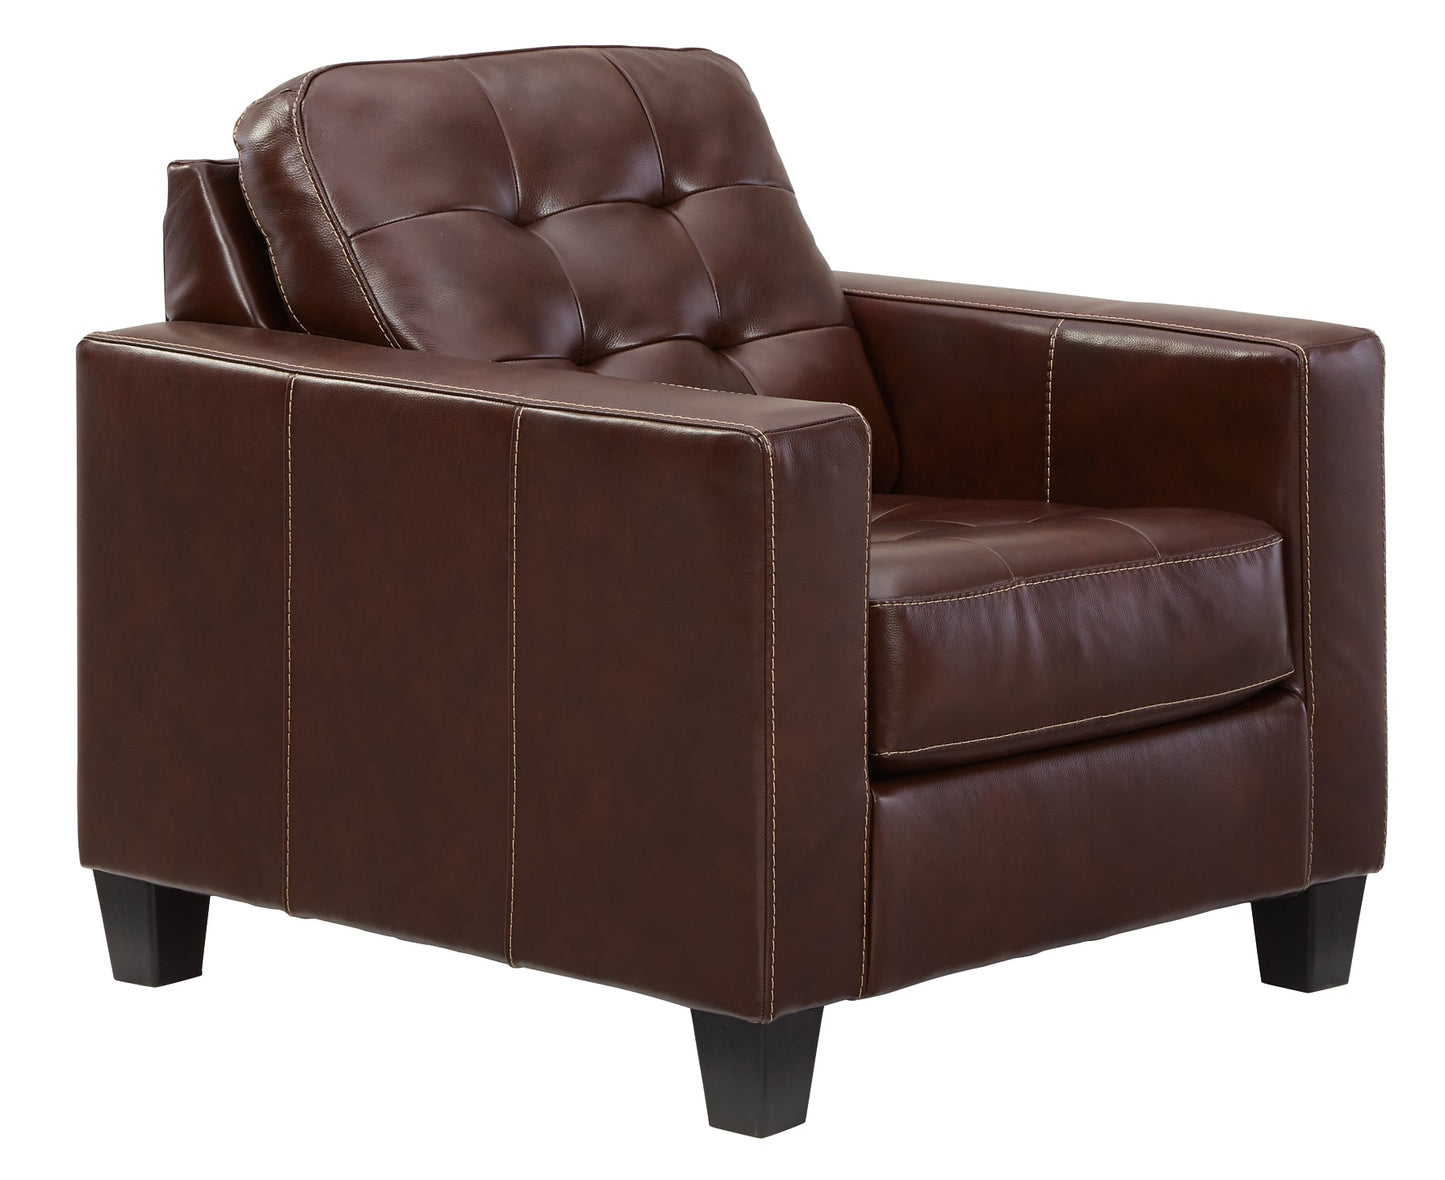 Altonbury Chair and Ottoman at Walker Mattress and Furniture